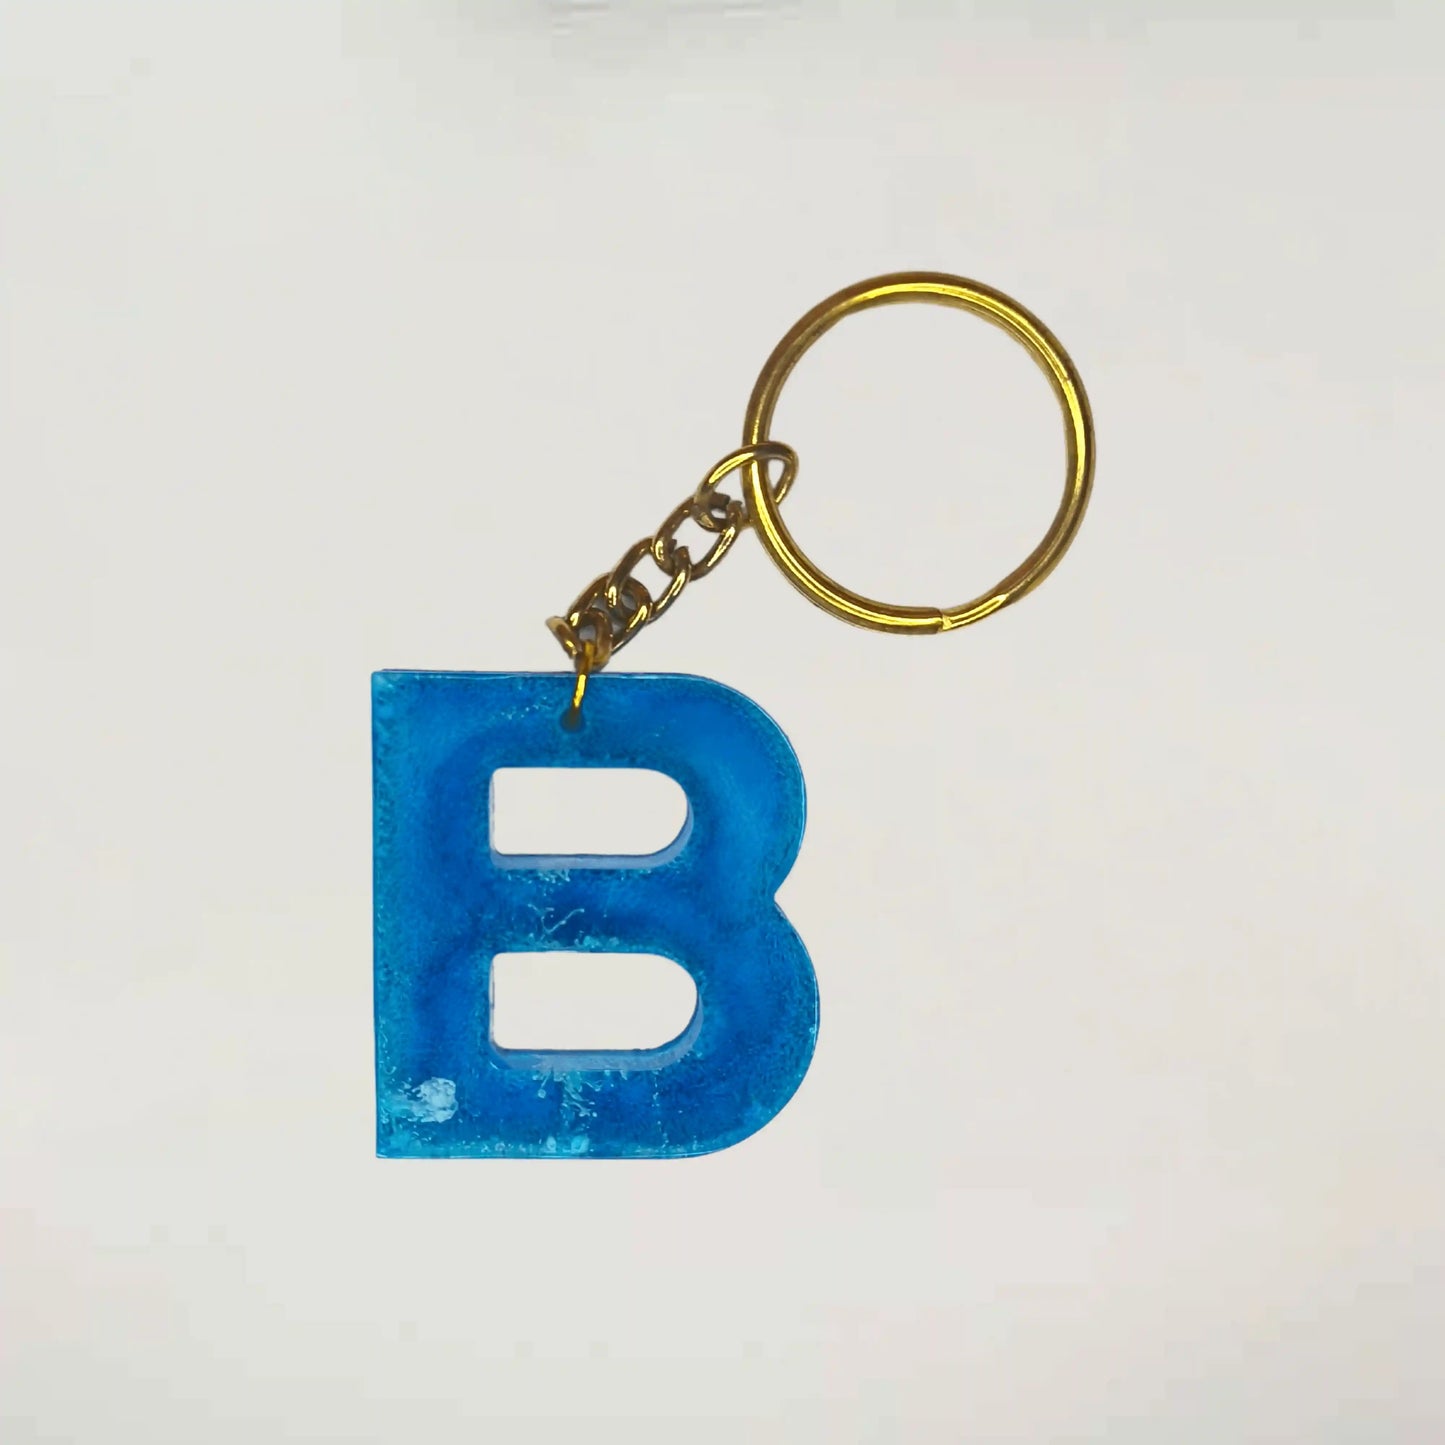 Shop Unique blue resin keychain with B Alphabet For Key & Bag Accessories